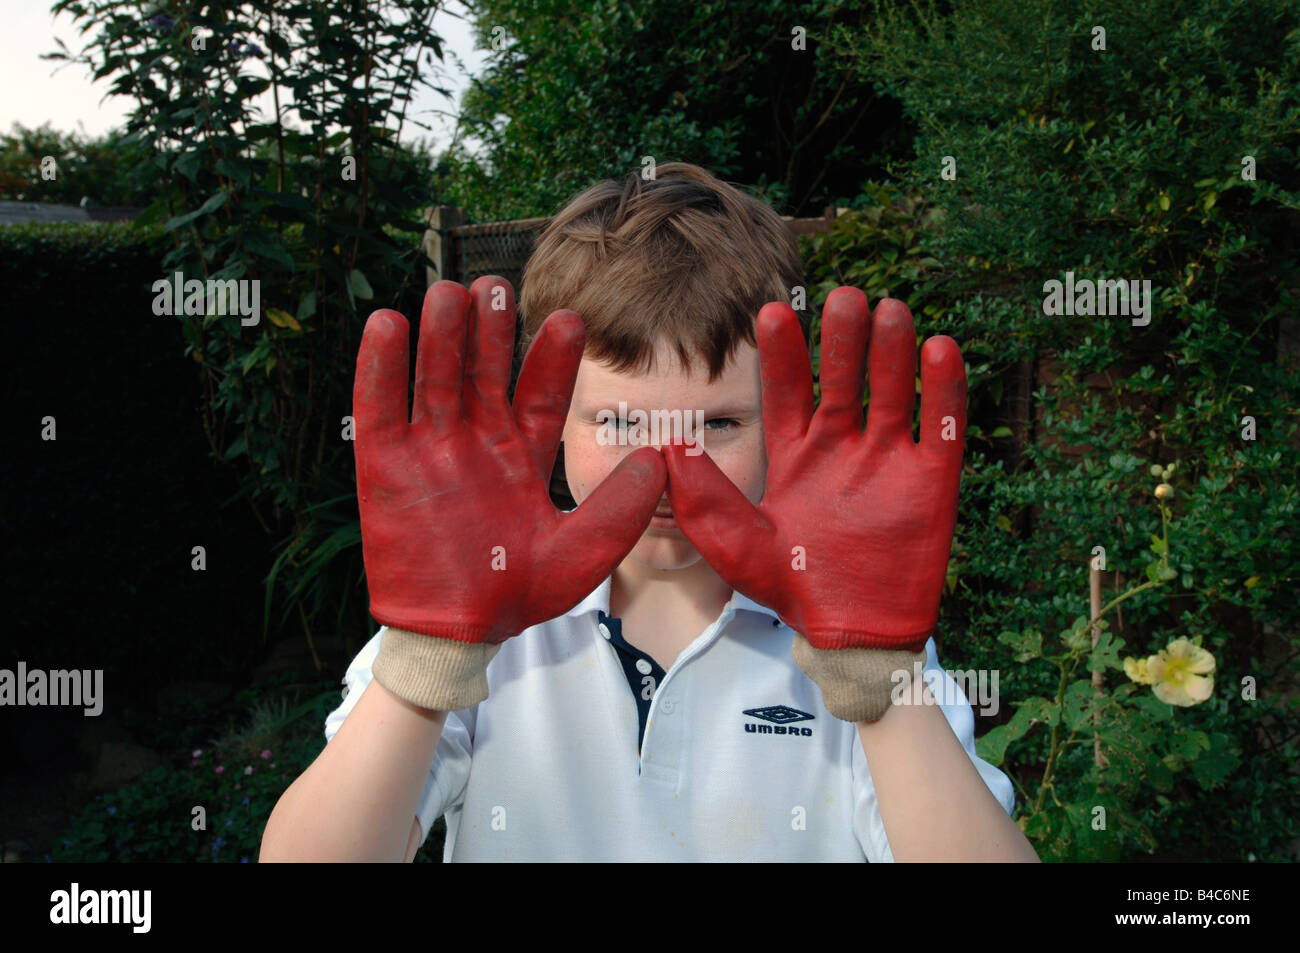 A 13yr Old Boy Wearing Red Rubber Gardening Gloves . Stock Photo